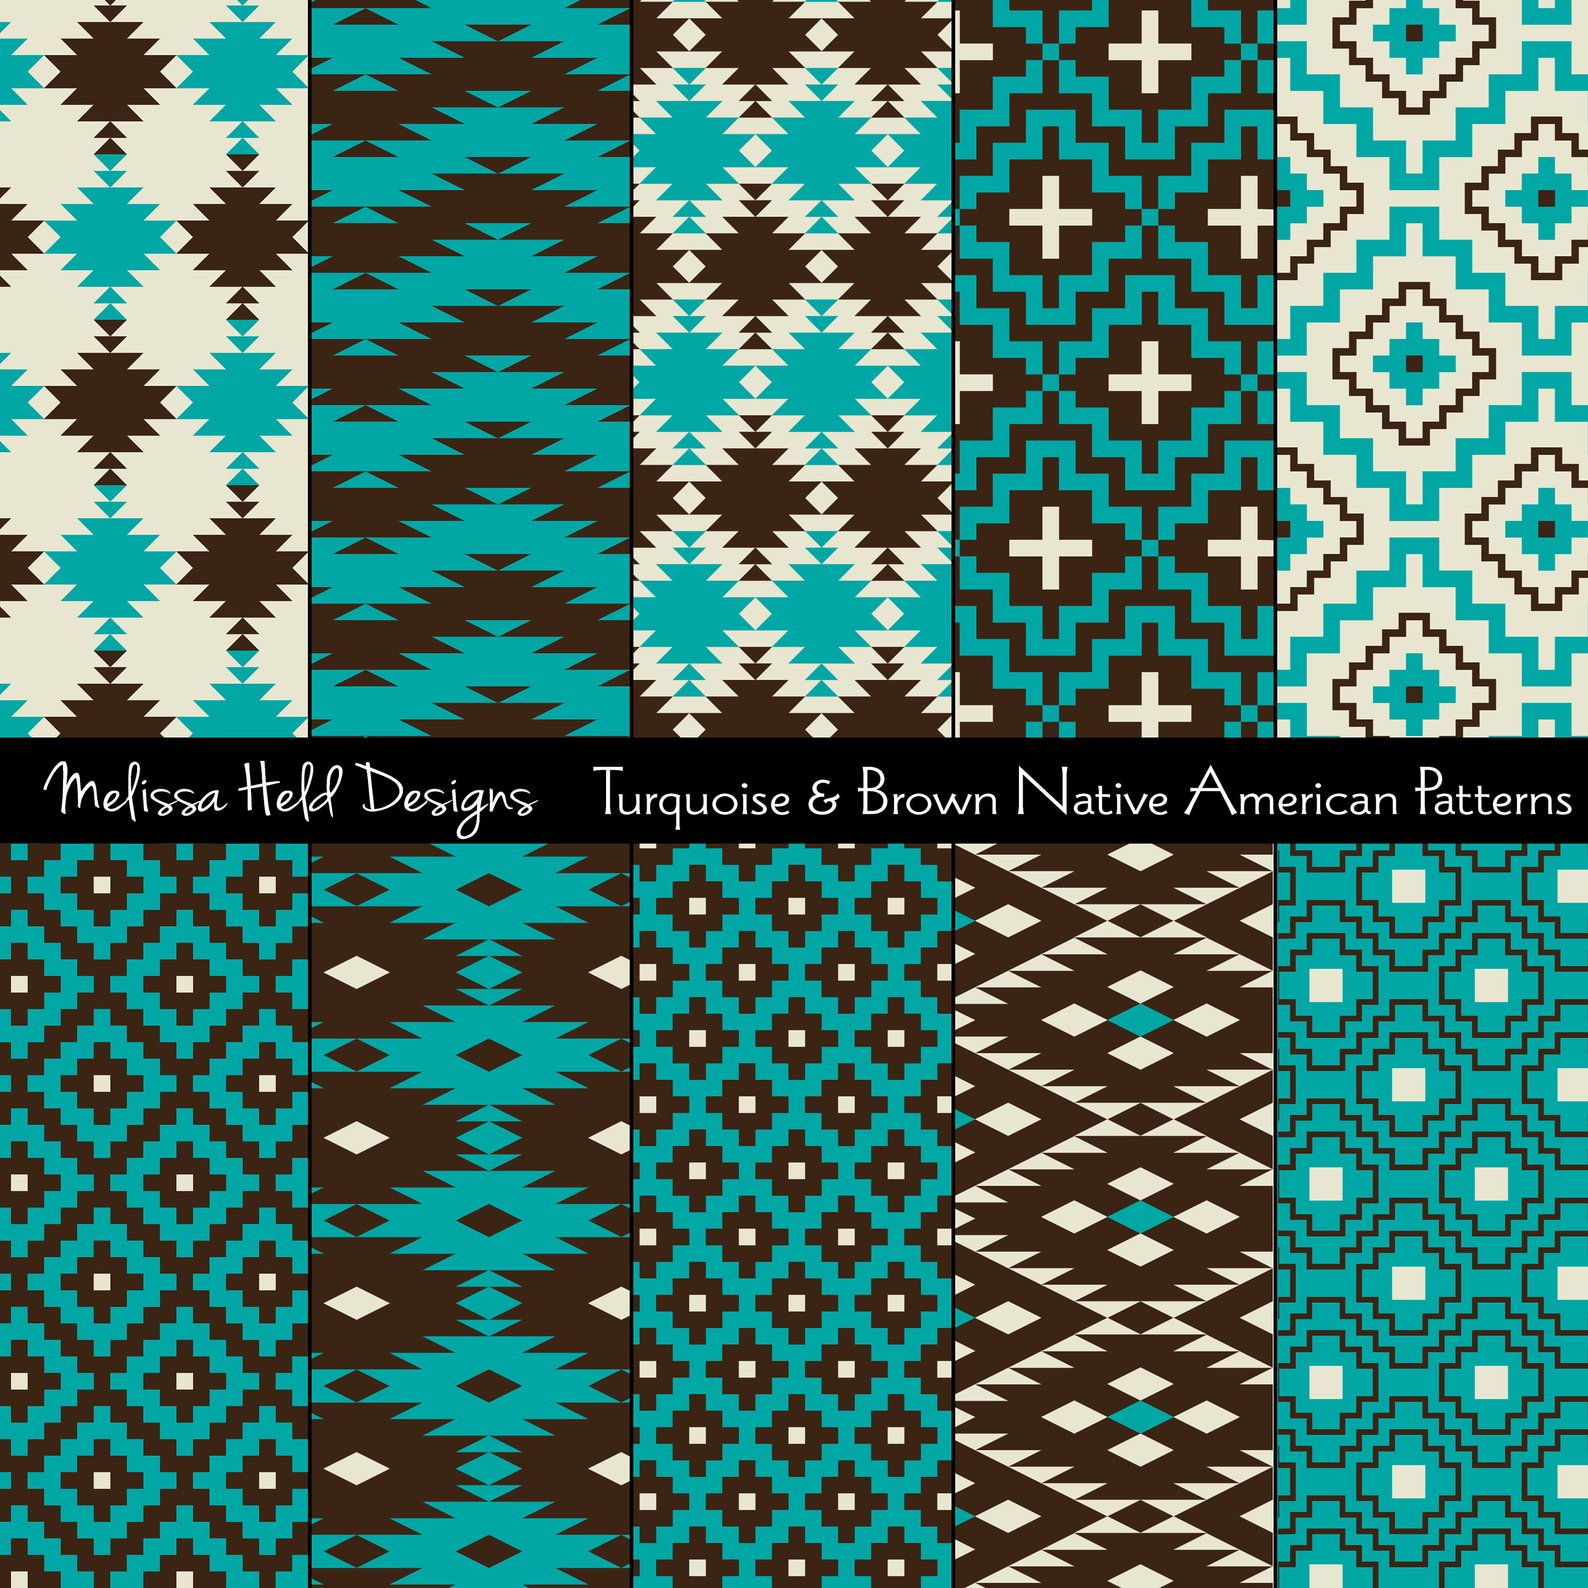 Native American Embroidery Patterns Turquoise Blue Native American Patterns